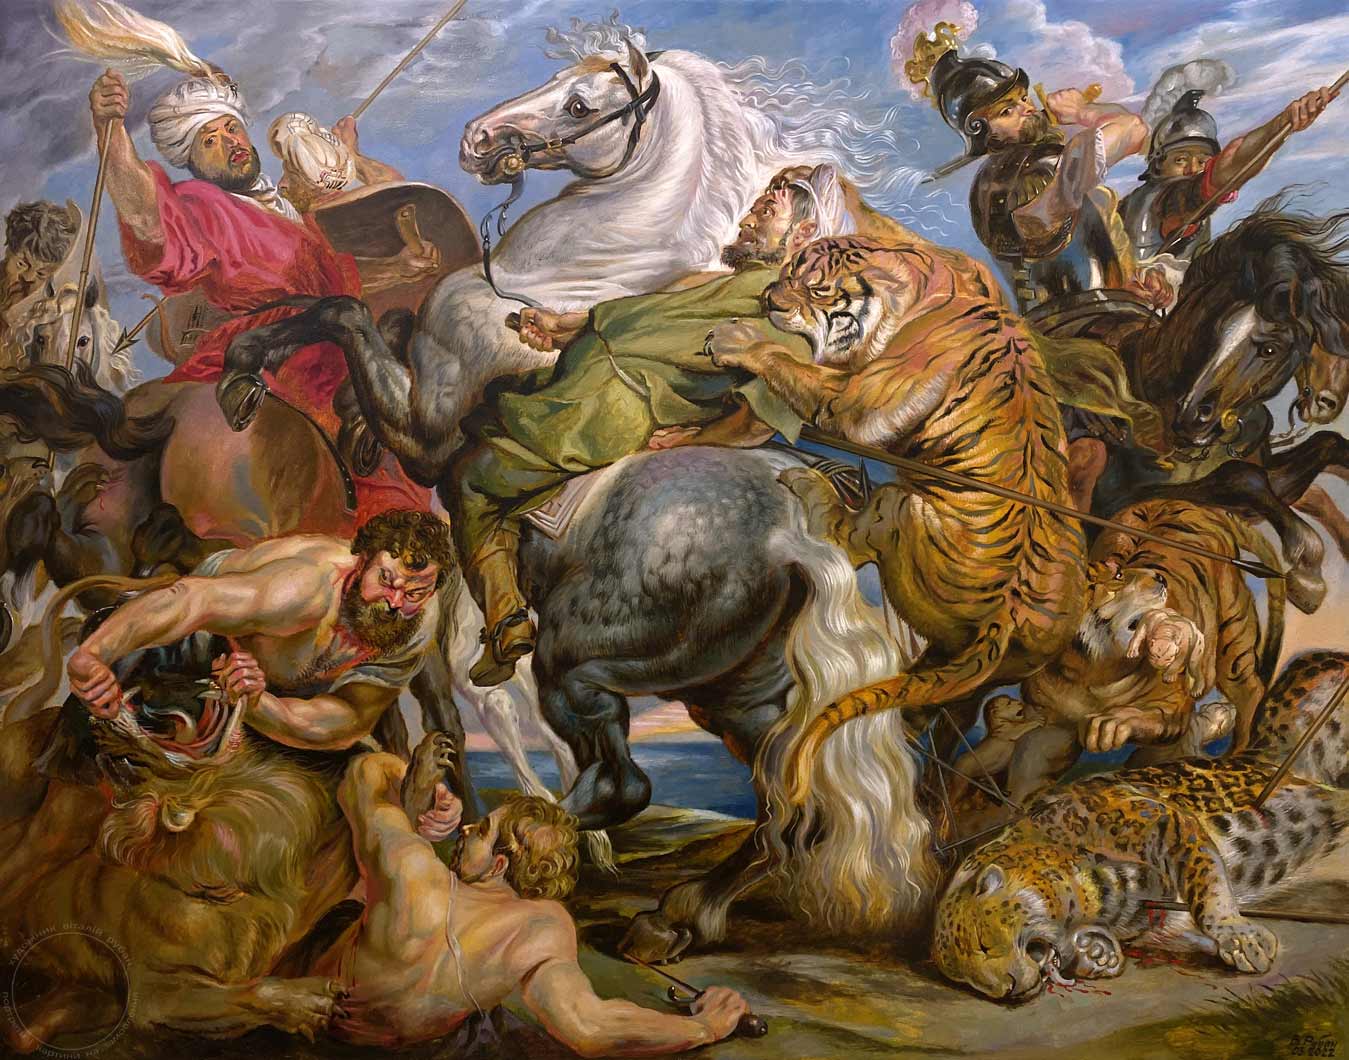 Copy of the painting The tiger hunt - artist Vitalii Ruban.